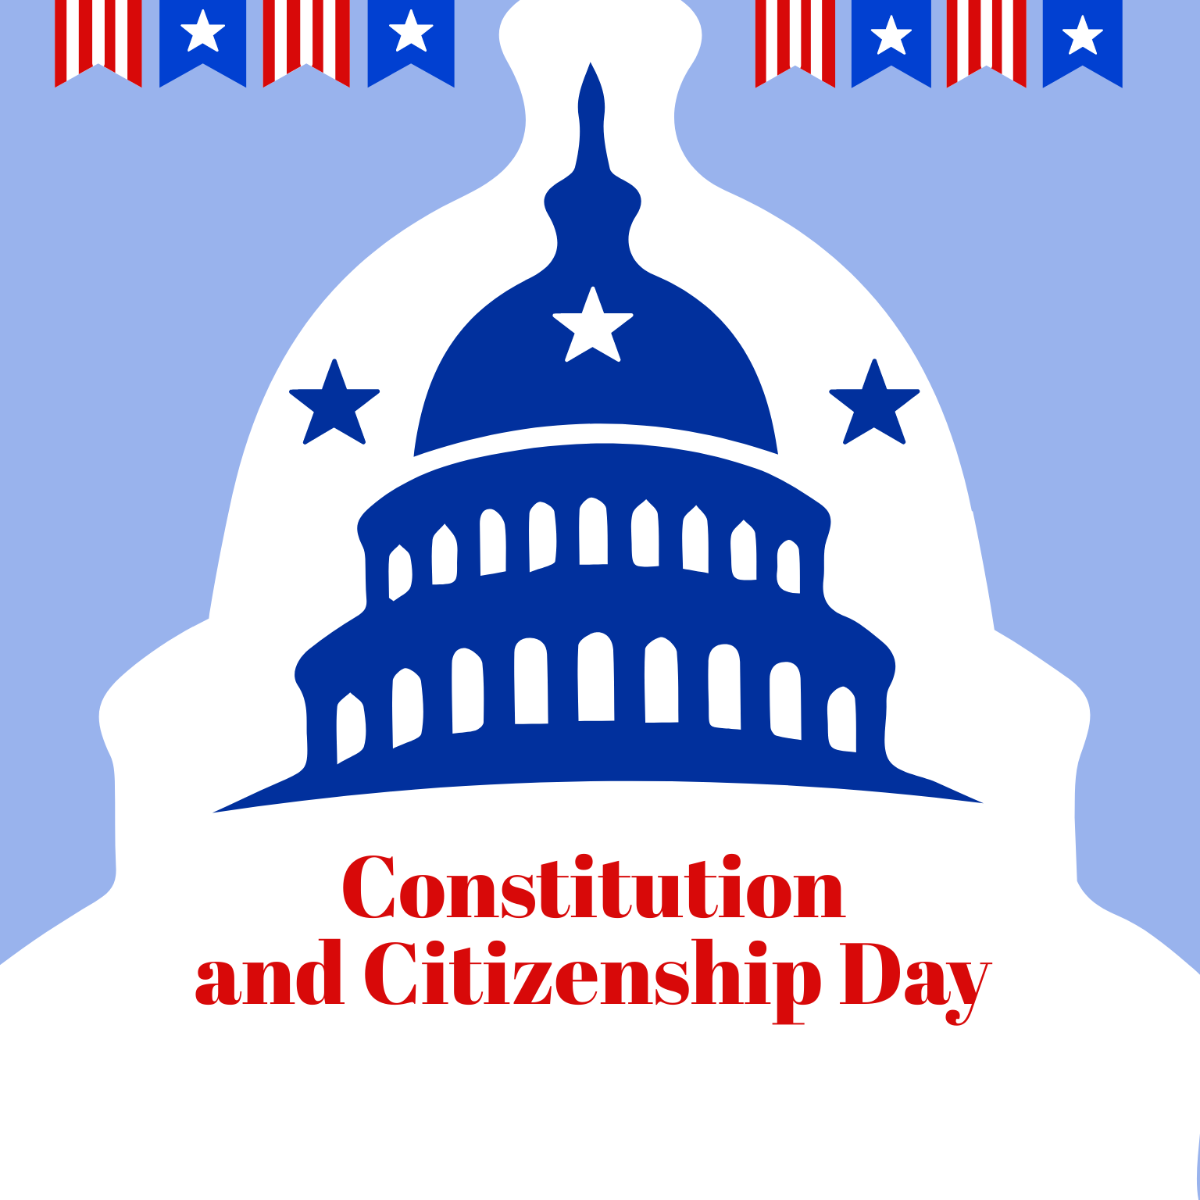 Free Constitution and Citizenship Day Illustration Template